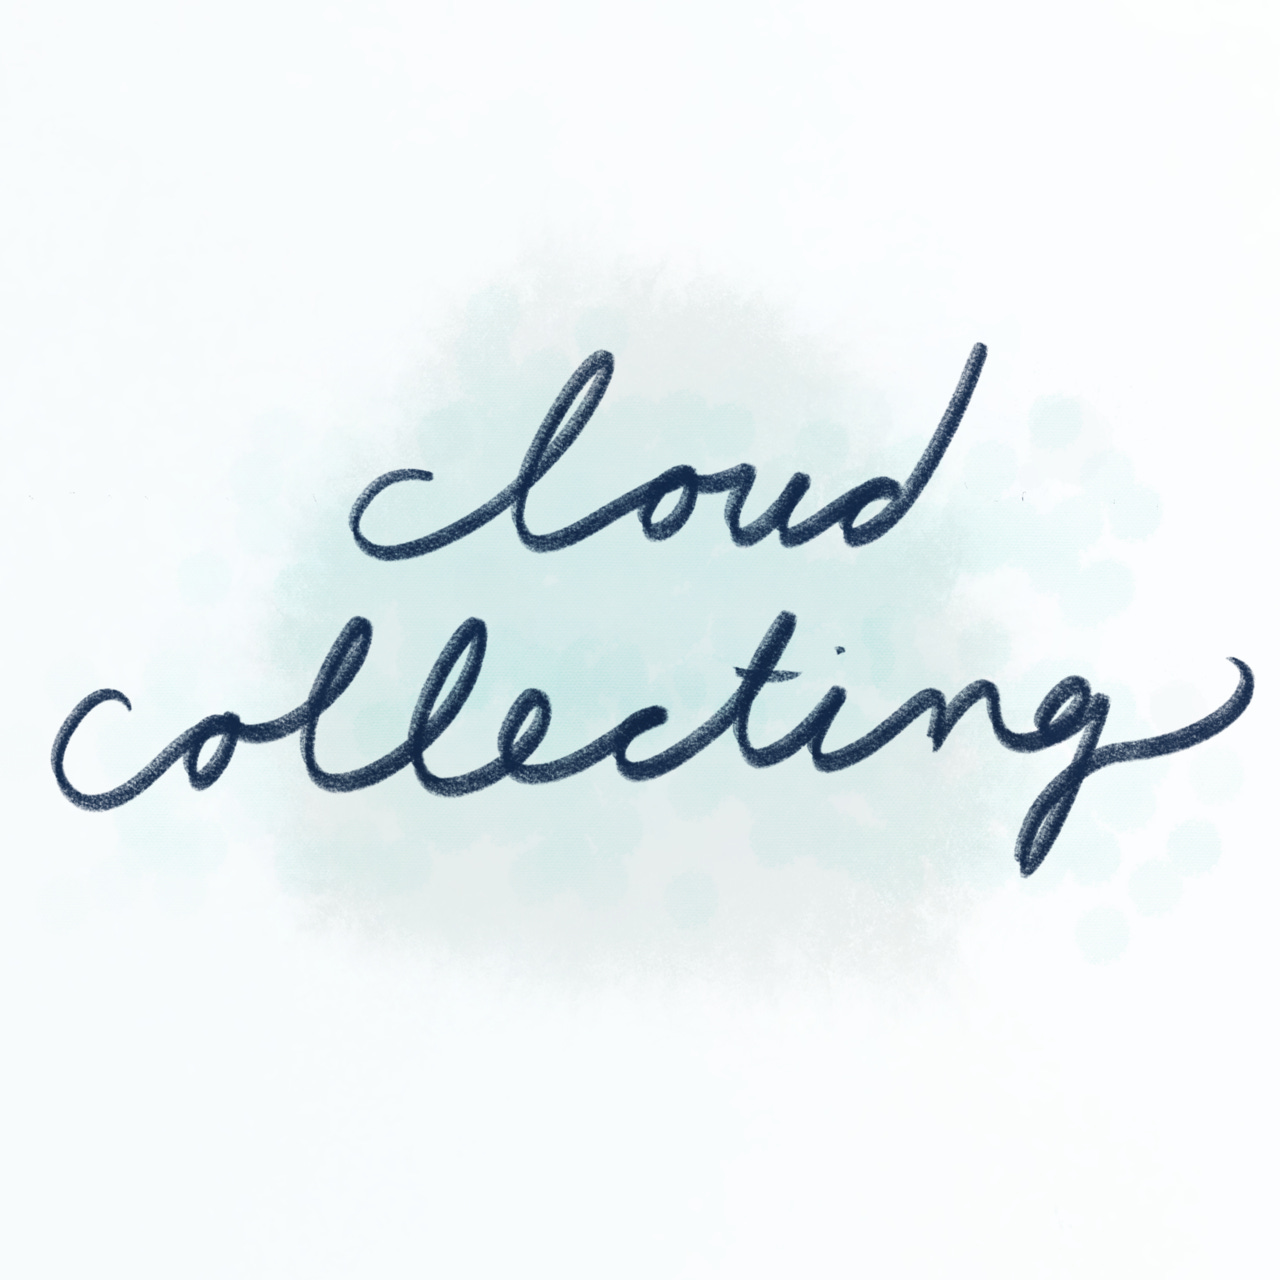 Artwork for cloud collecting